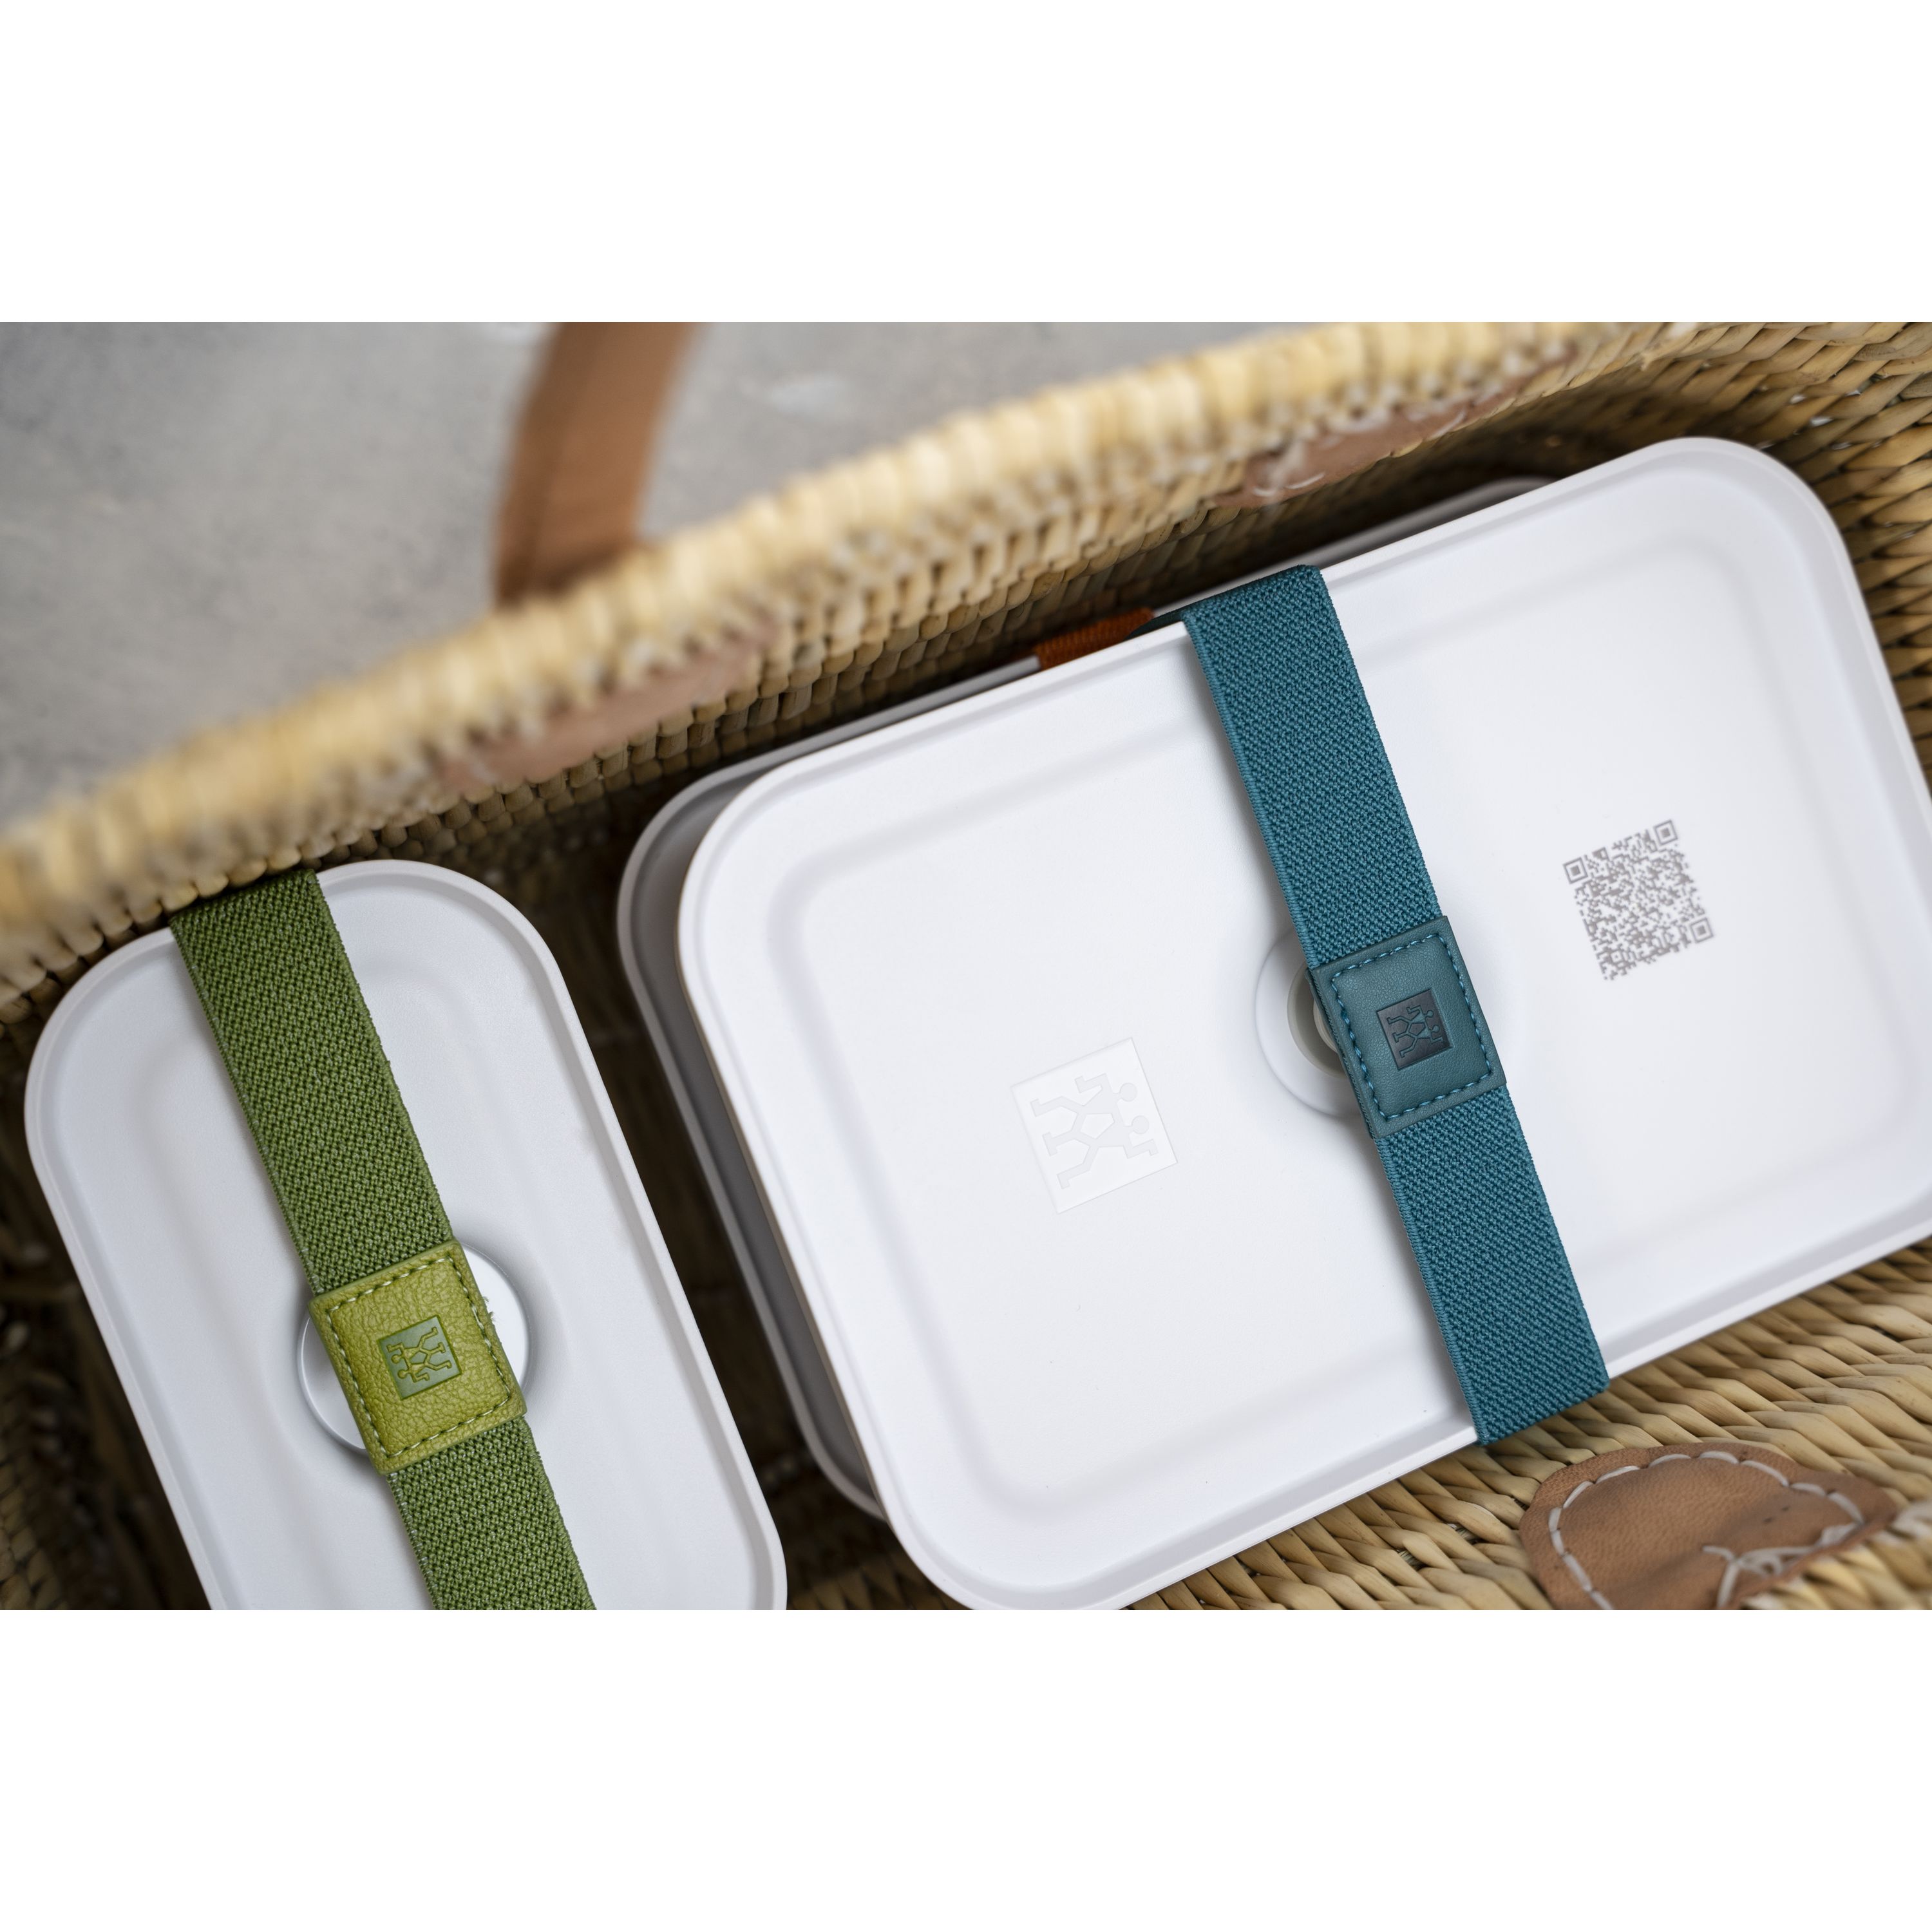 Umami - All-in-1 Bento Box Adult Lunch Box - with Utensils - White, Bamboo  - NEW